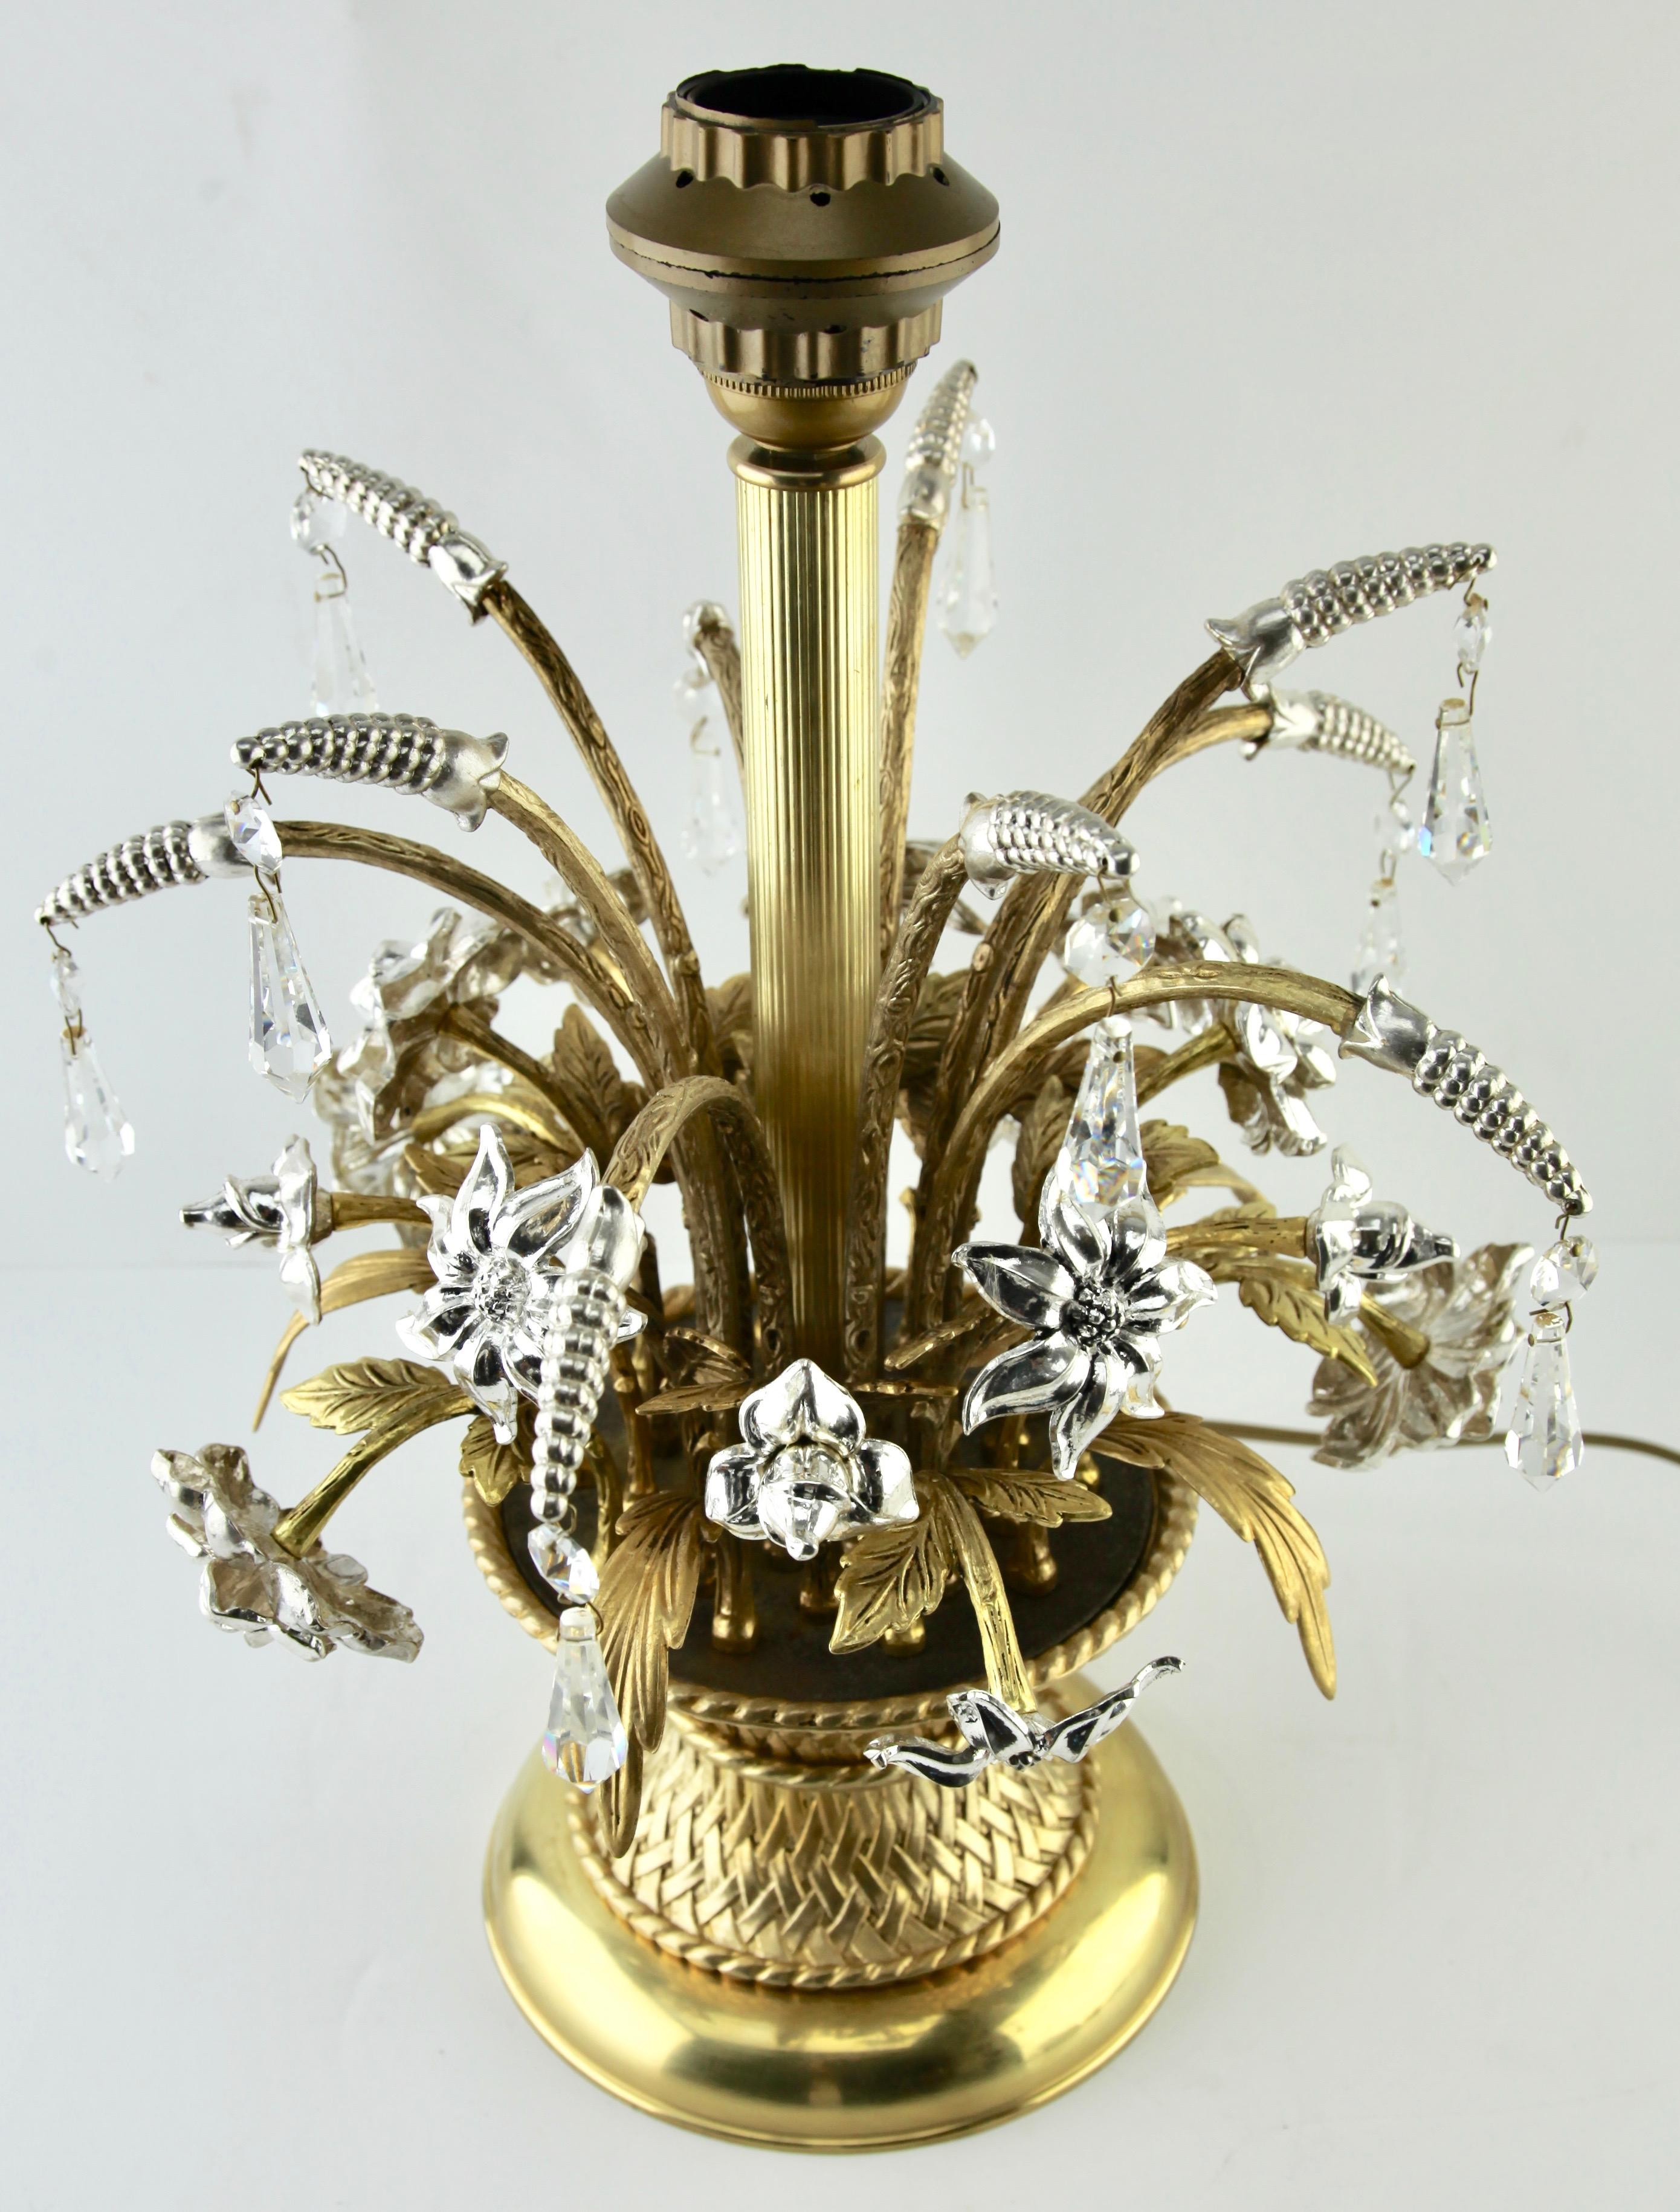 Lamp Representing a Bouquet of Brass and Silver Metal Flowers in a Basket, 1960s For Sale 1